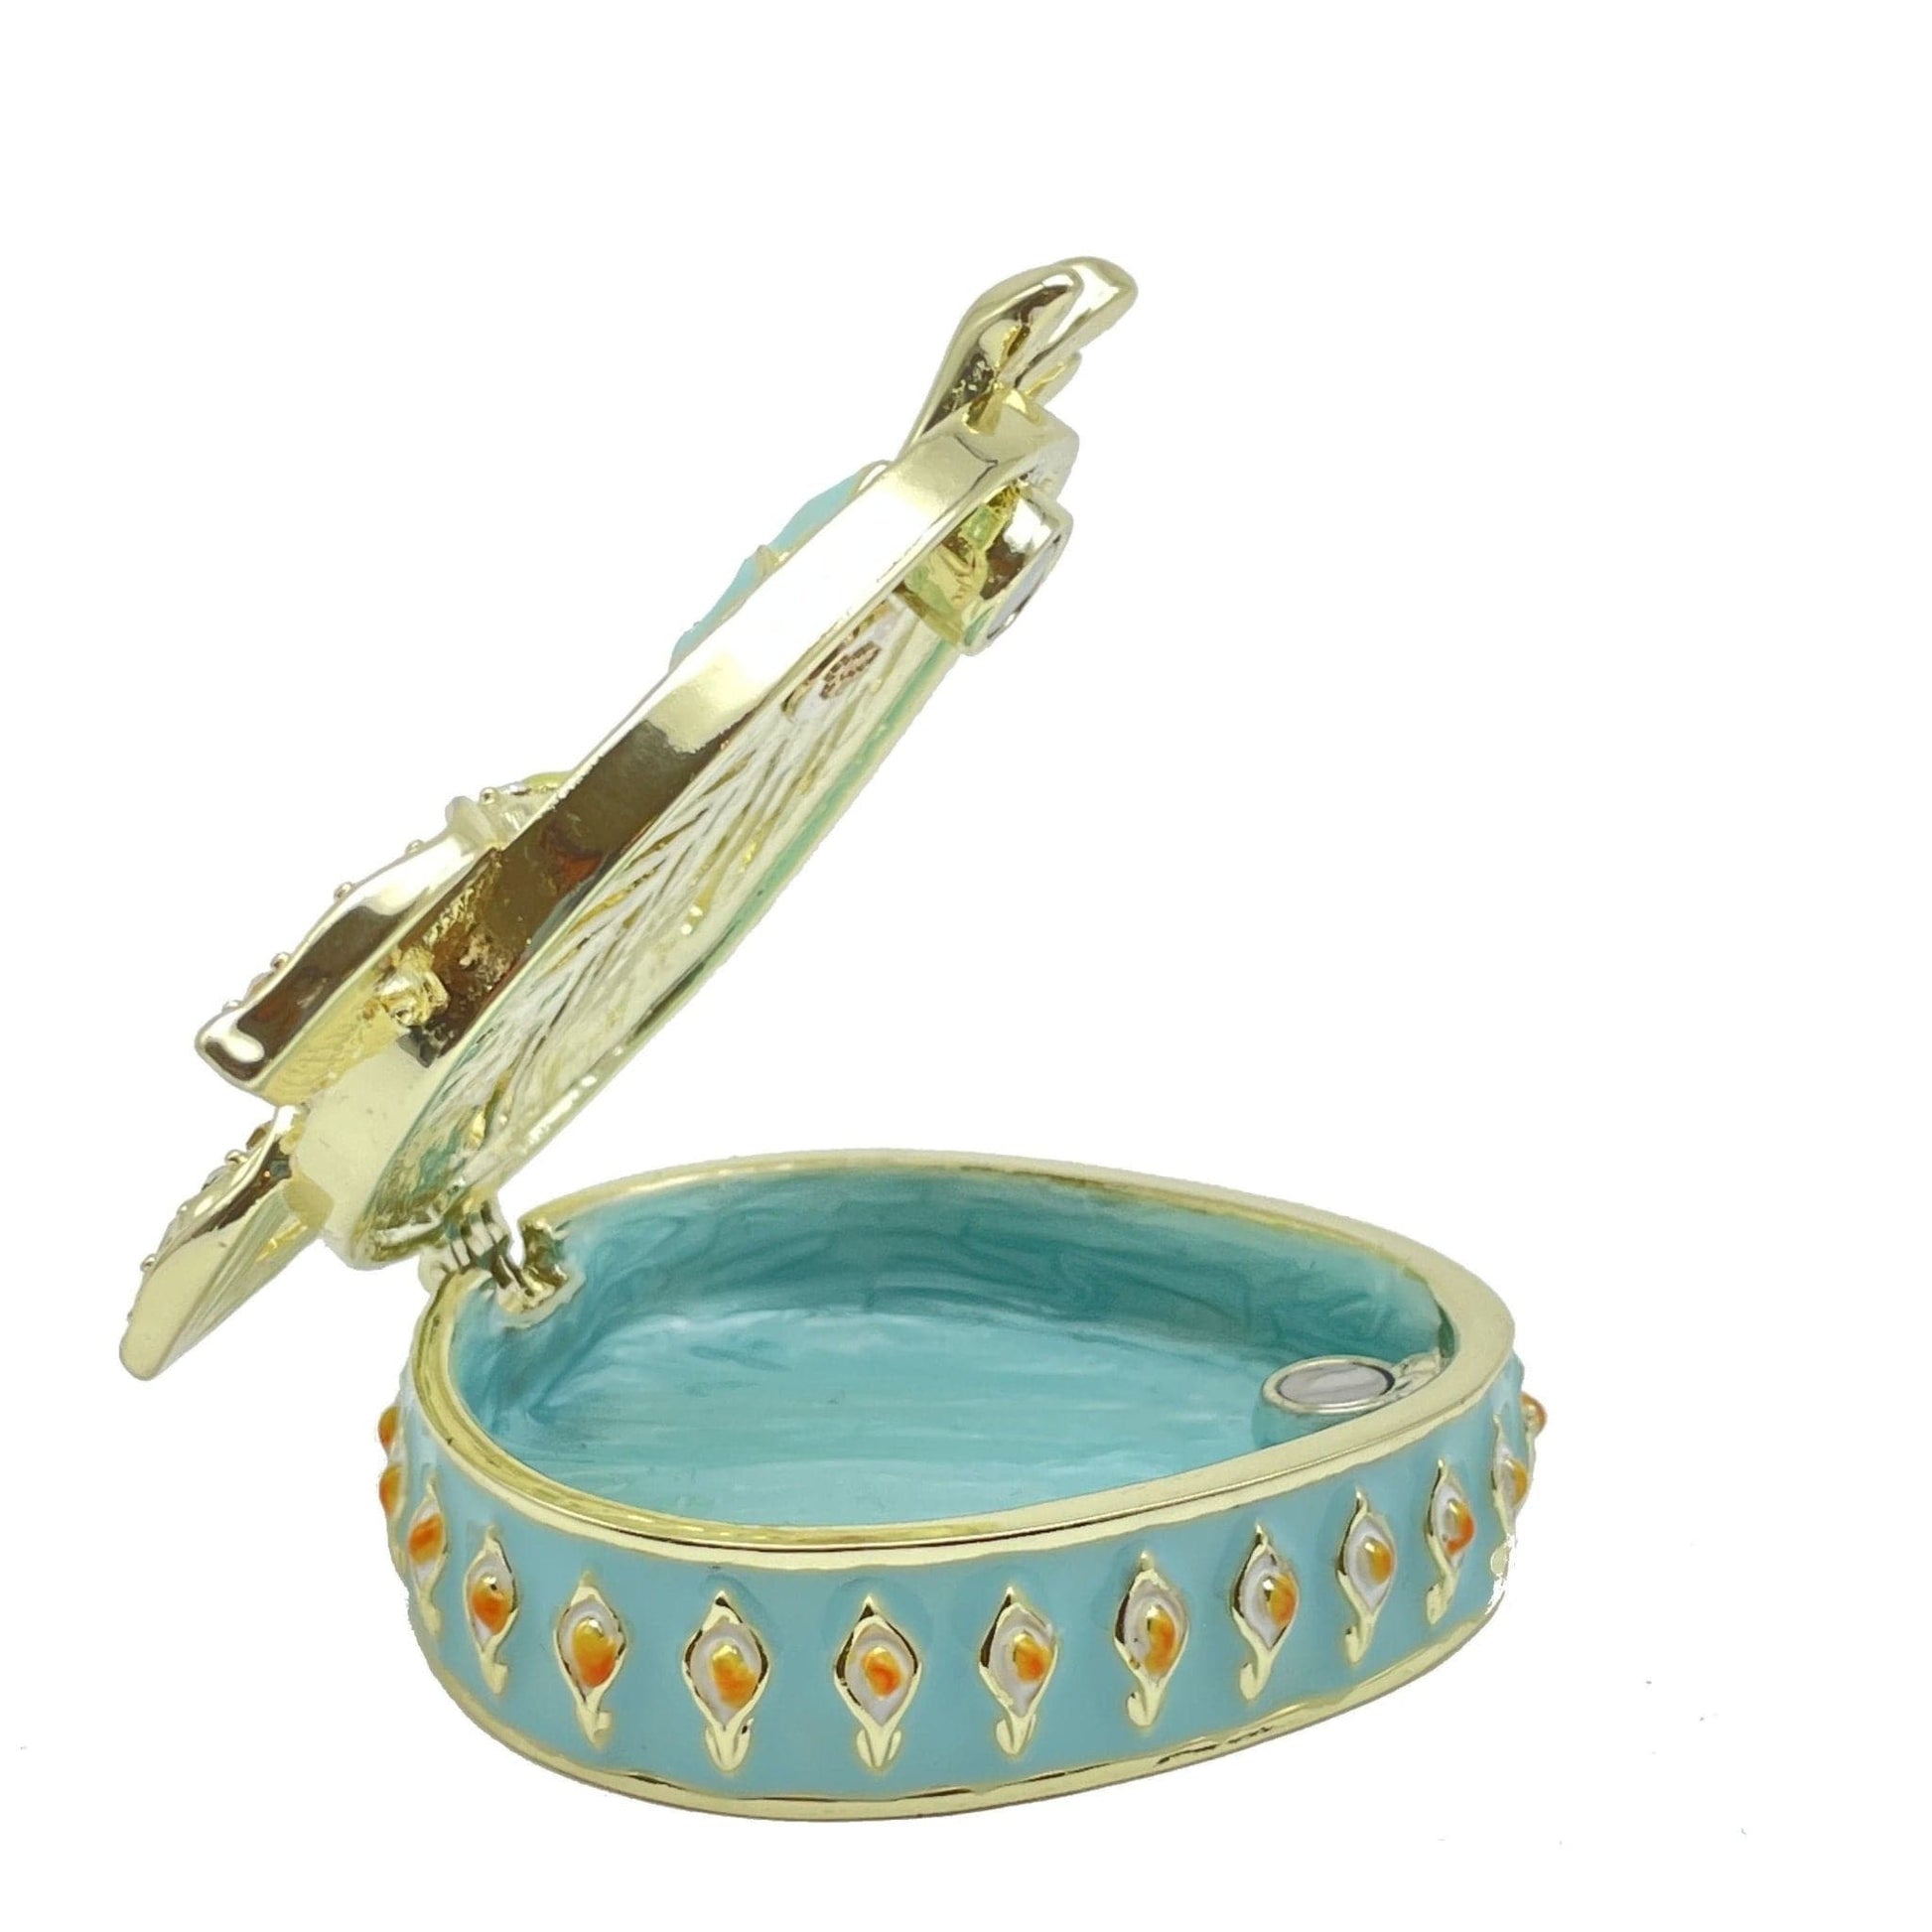 Green turquoise Beautiful Decorated Trinket Box | Treasures of my HeART